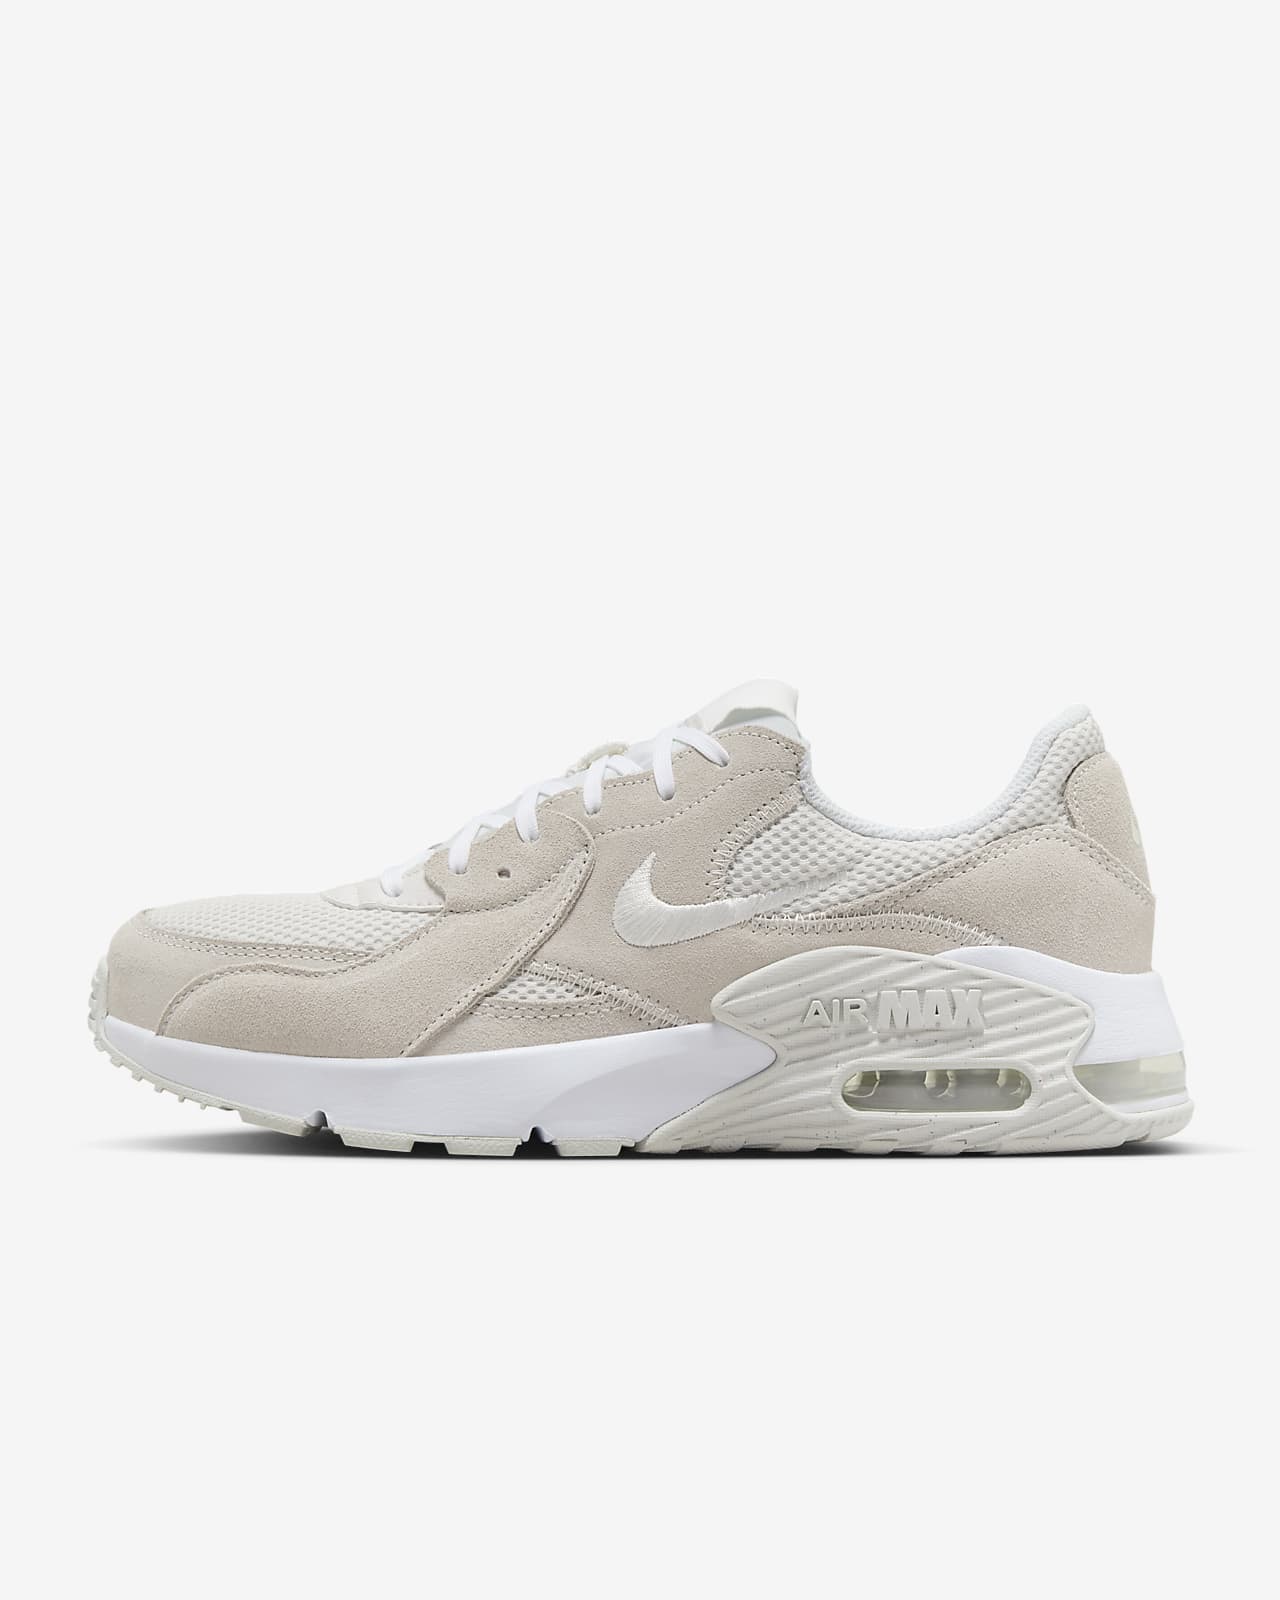 Shop Nike AIR MAX EXCEE Casual Style Logo Low-Top Sneakers (DZ2619-001) by  melissaOnlineBR | BUYMA